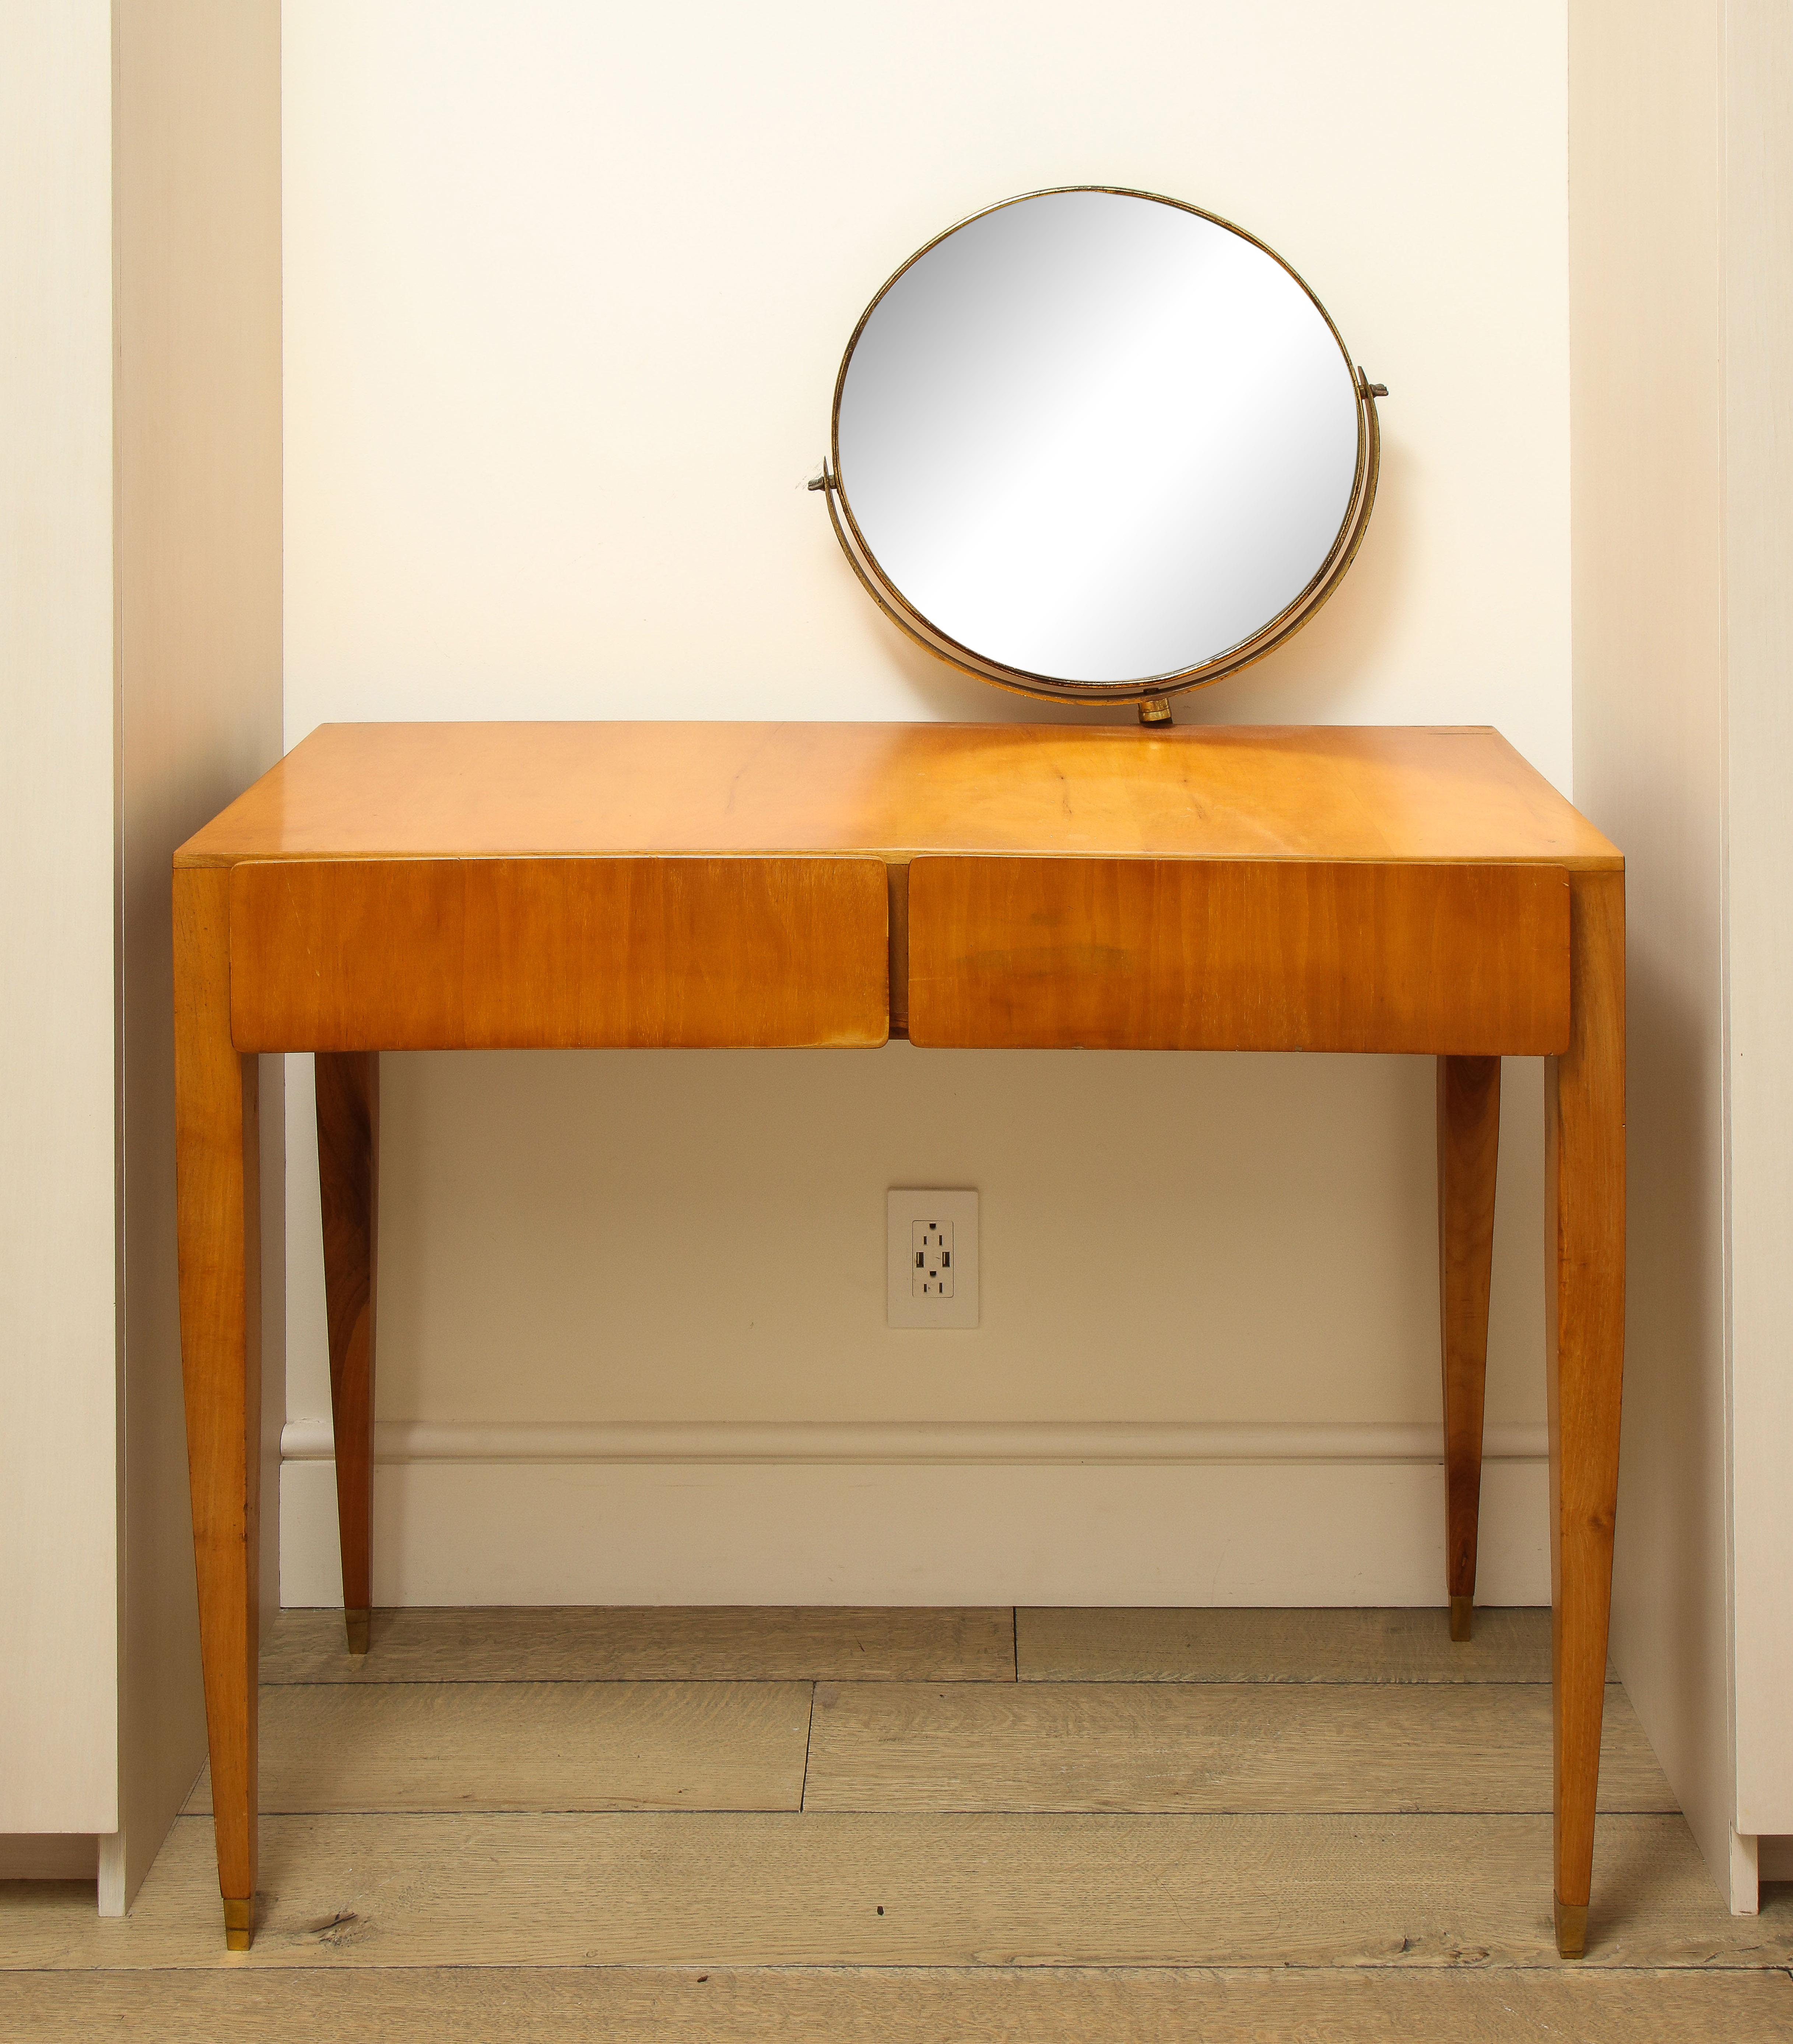 Iconic and modern Gio Ponti Vanity from Hotel Naples
This is a standout piece
Oak and brass
and an incredible addition to any collection
Provenance: The Royal Hotel, Naples Private collection, Rome

Literature: Gio Ponti: l'Arte Si Innamora